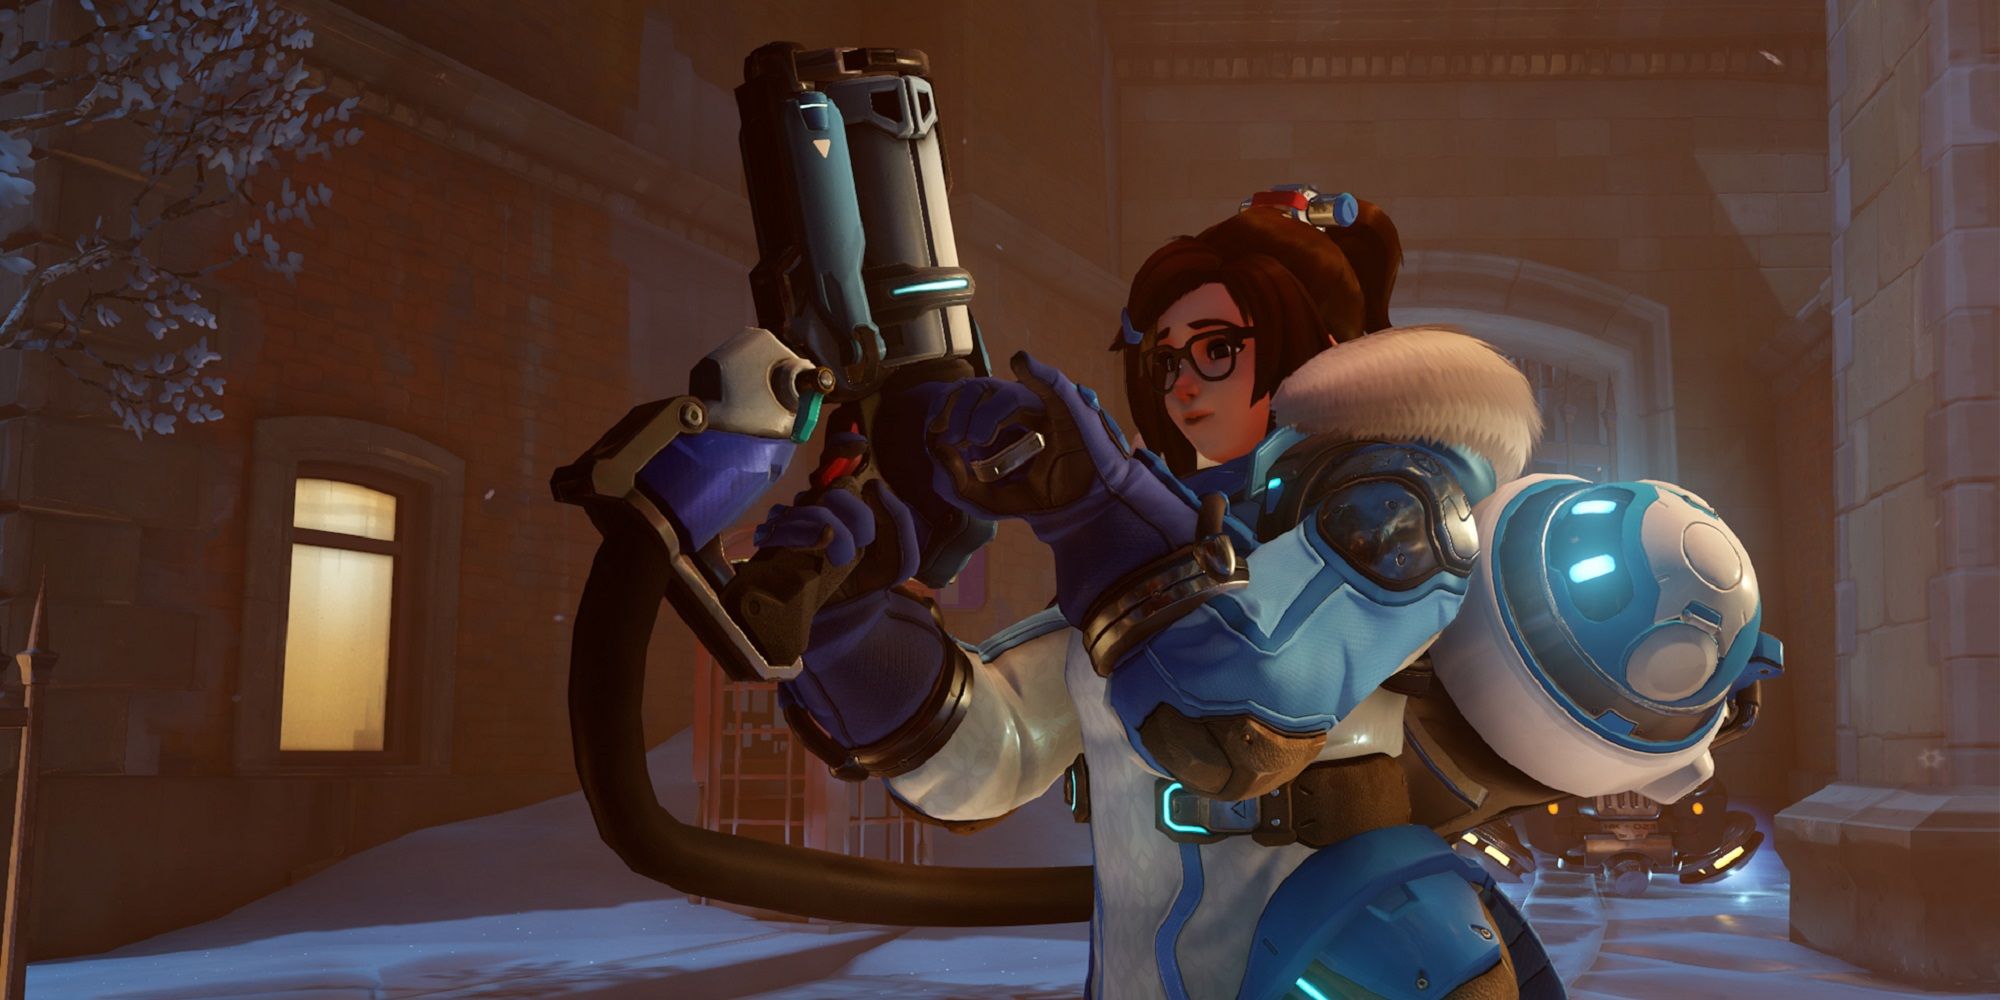 Overwatch 2 November 17 update release time, patch notes for Mei return,  balance changes, Gaming, Entertainment